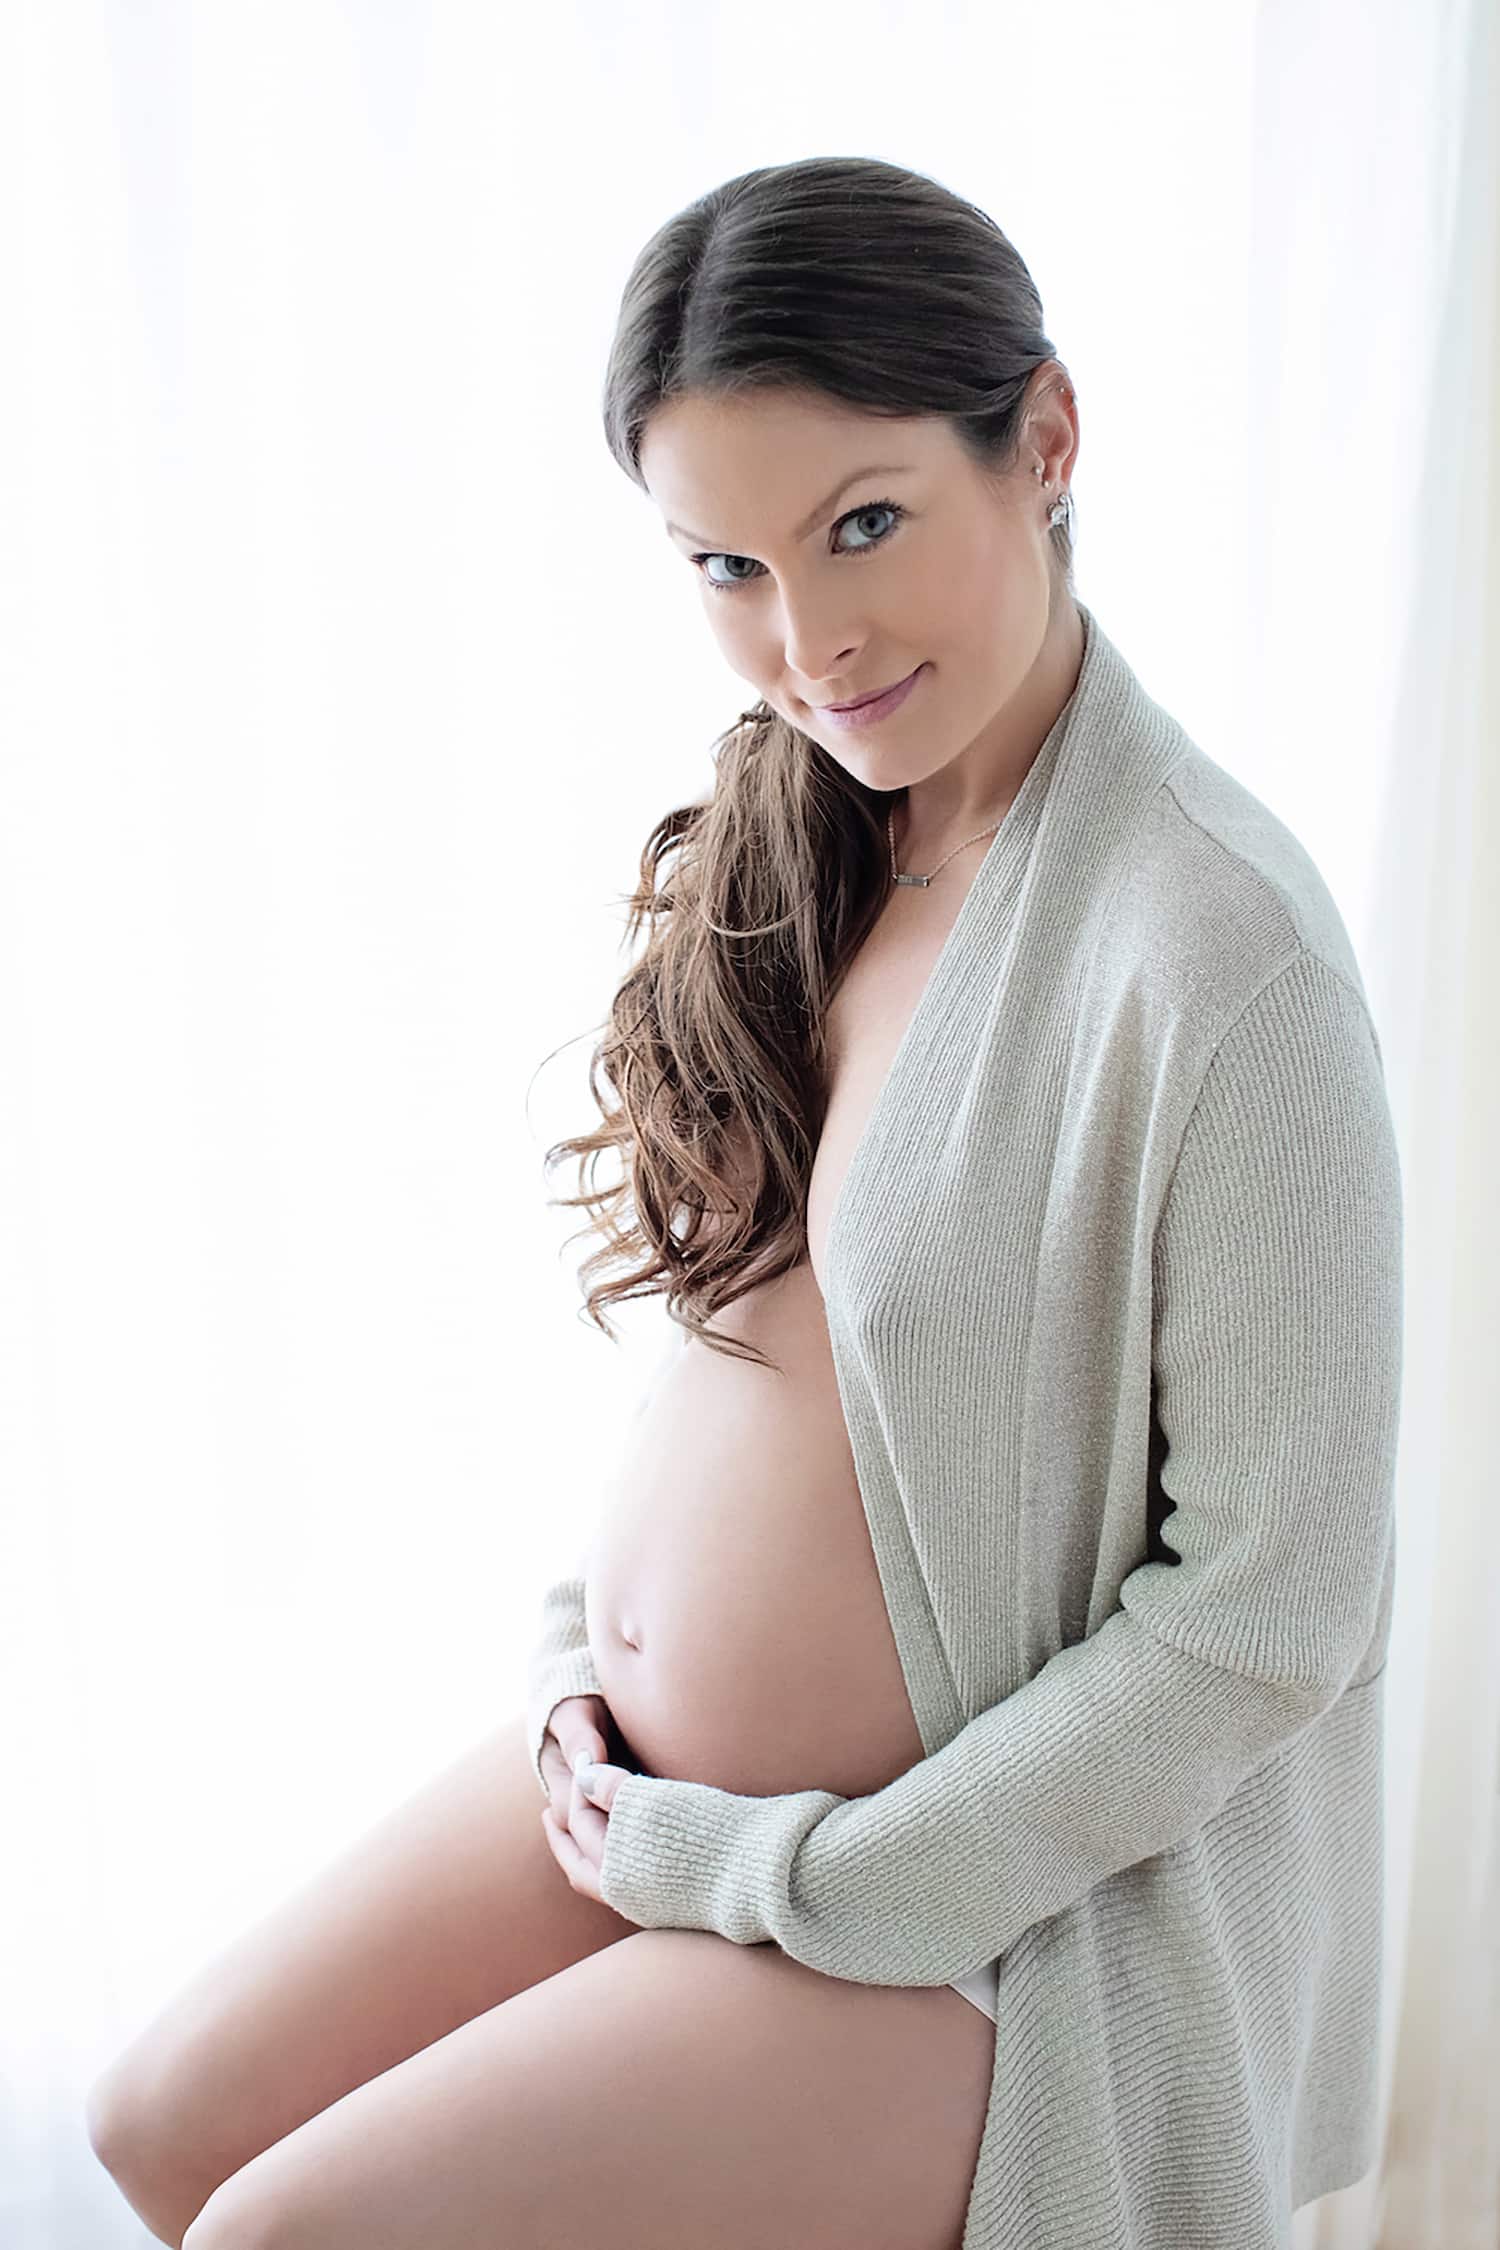 A woman with a messy ponytail in a maternity shoot.